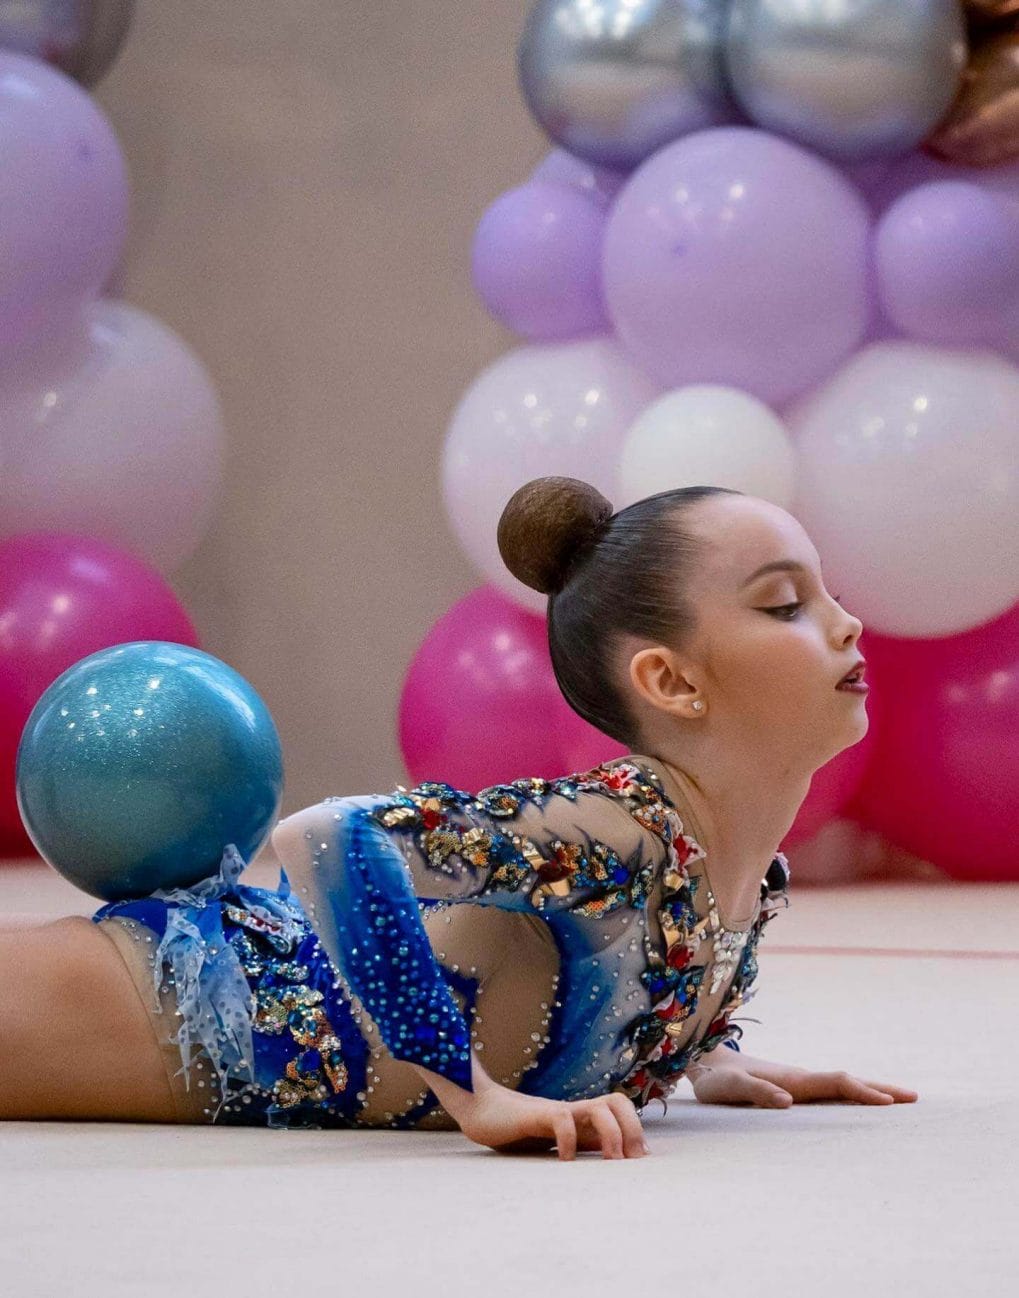 Simple, distraction-free bun keeping gymnasts focused on their routine, embodying cleanliness and precision